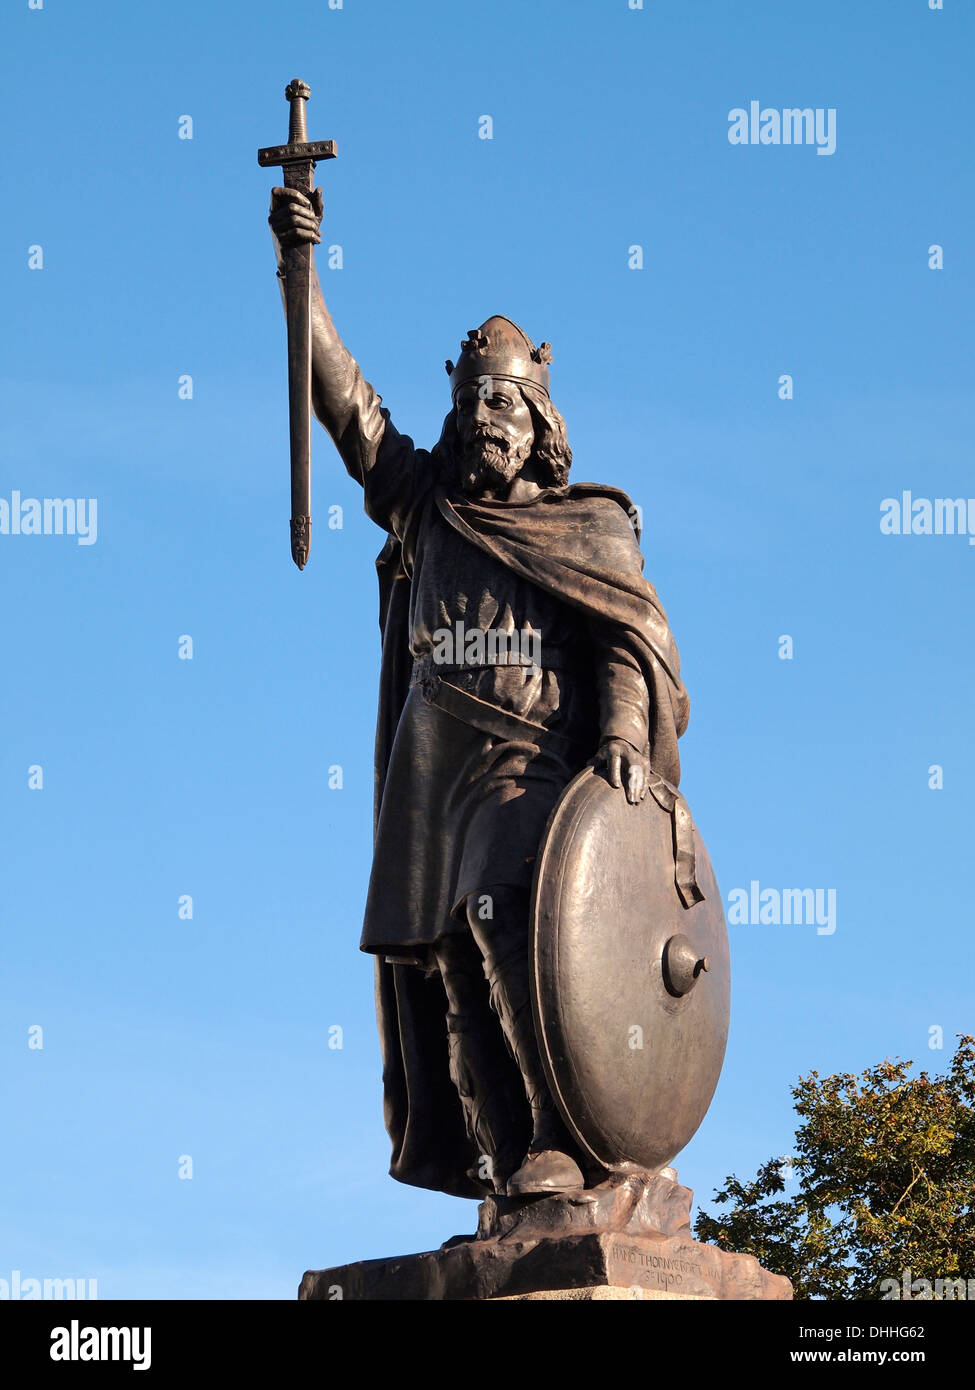 Alfred's statue in Winchester, thought you arselings might appreciate it! :  r/TheLastKingdom